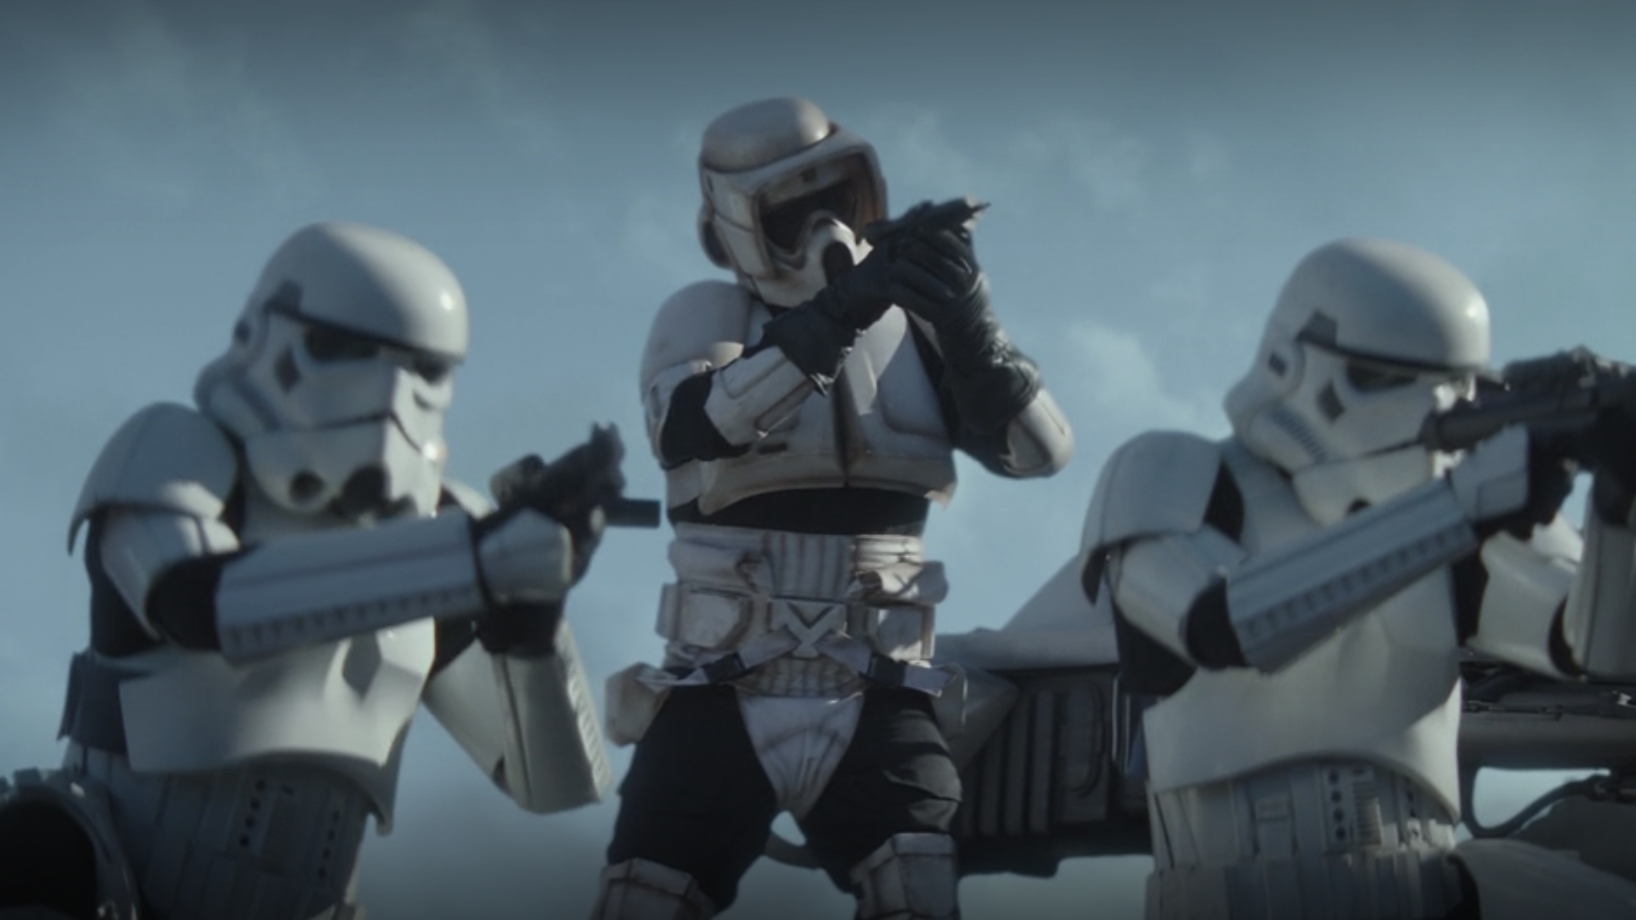 stormtroopers in the show